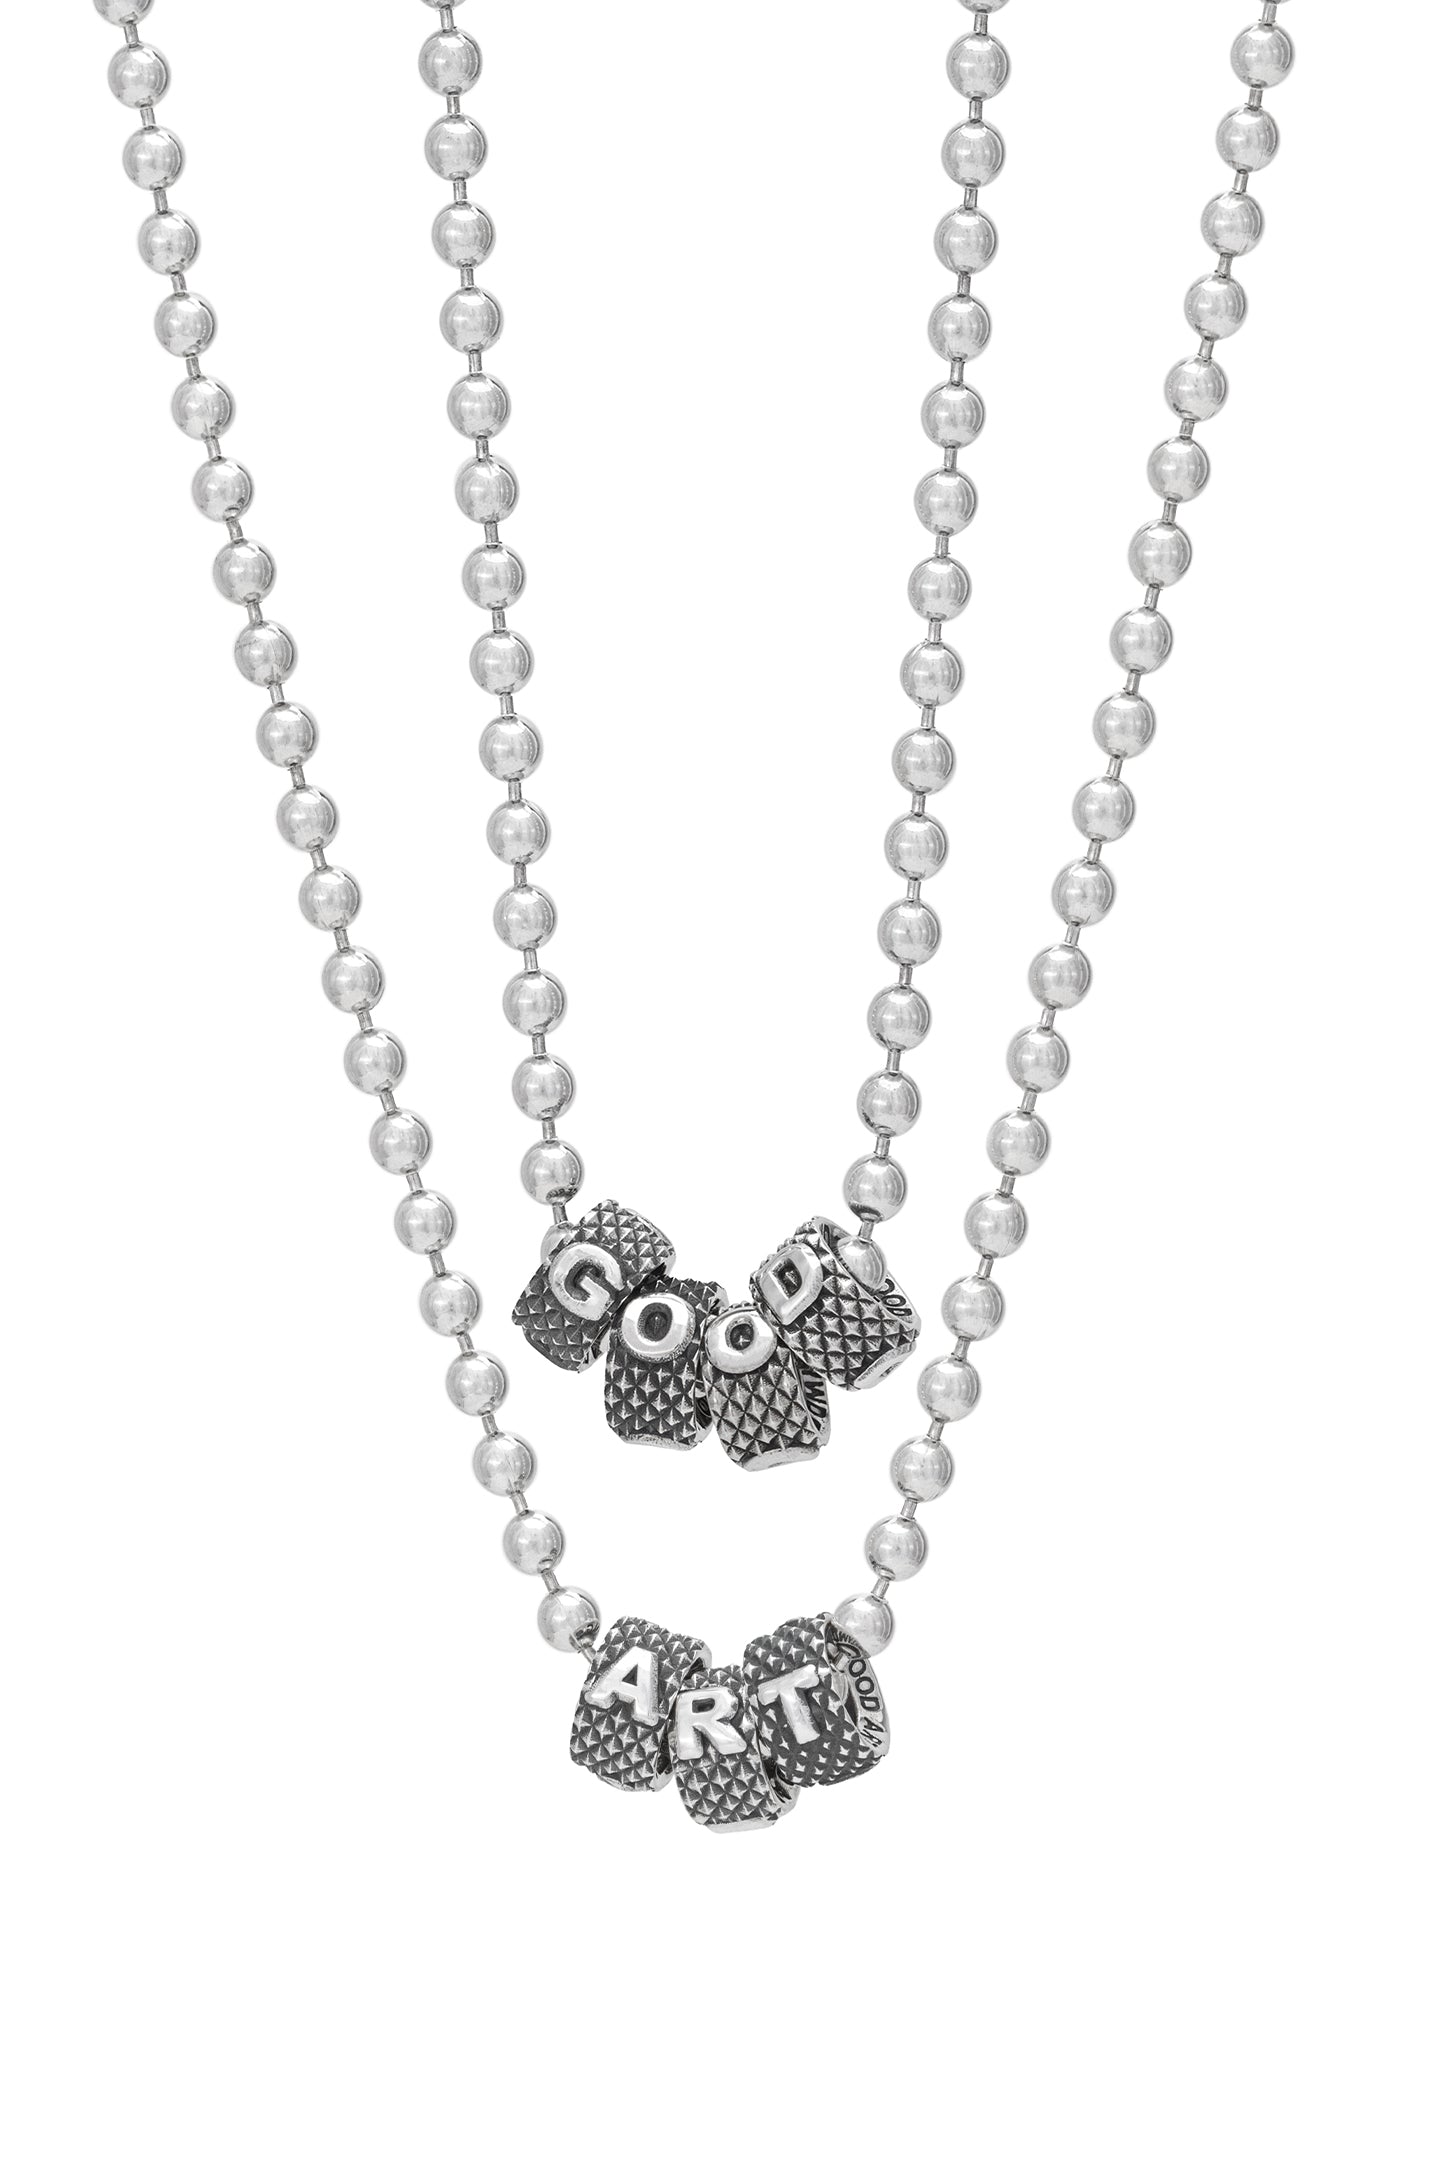 this photo shows the #10 ball chain necklace with ABC rondel spelling out "good" and a second necklace spelling out "art"